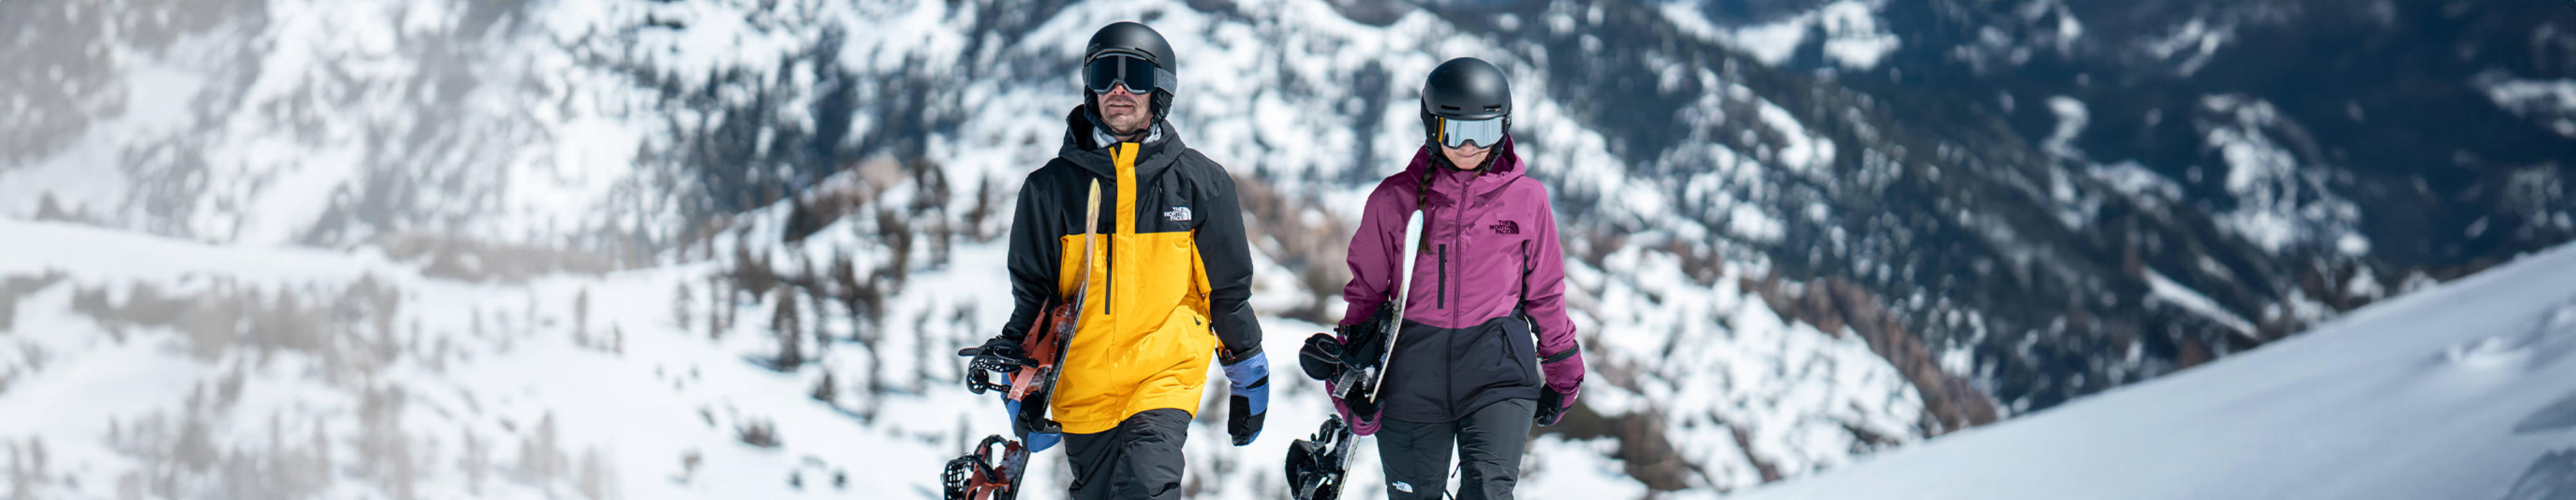 Two snowboarders wearing gear from The North Face carry their boards through a snowy mountain landscape.